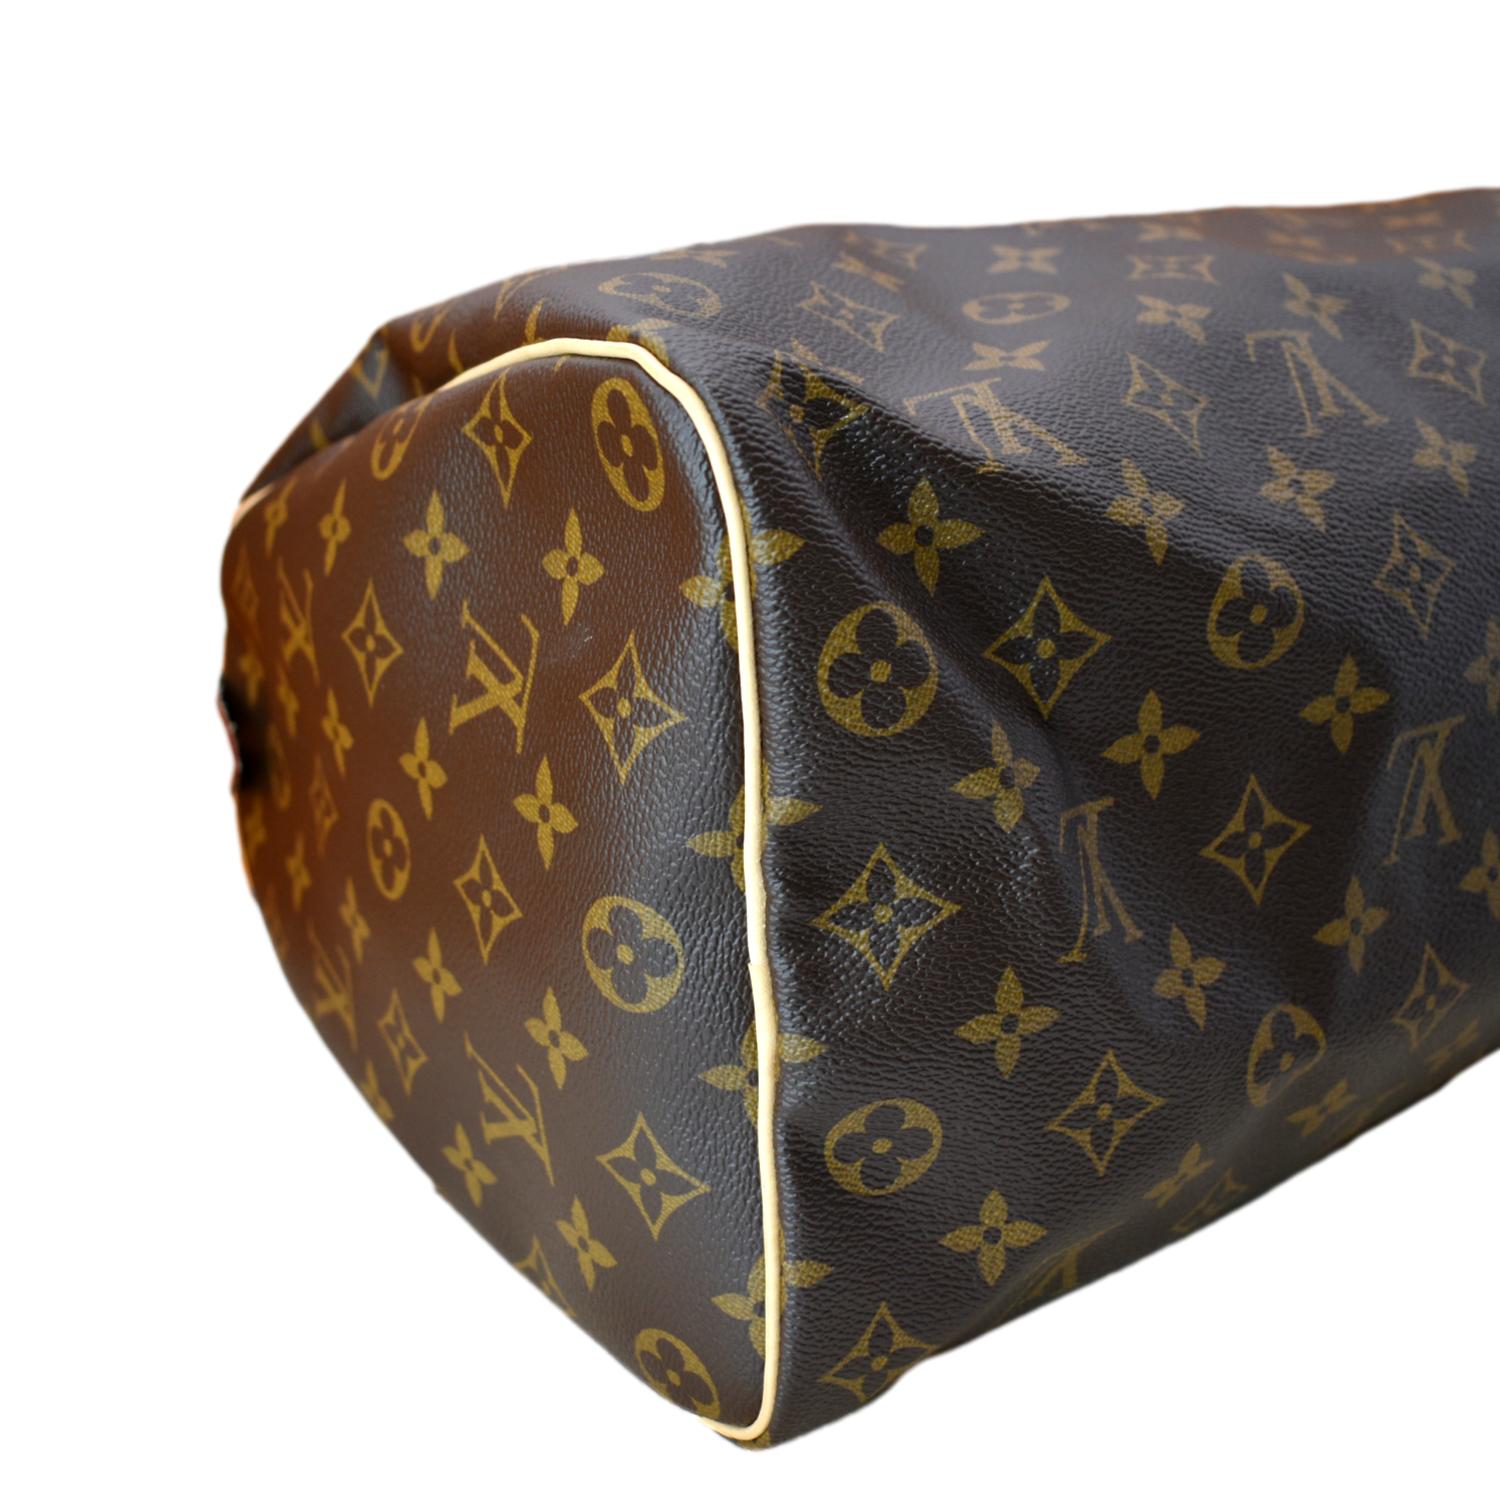 Louis Vuitton // Canvas Leather Speedy Satchel Bag - Pre-owned Luxe Bags -  Touch of Modern